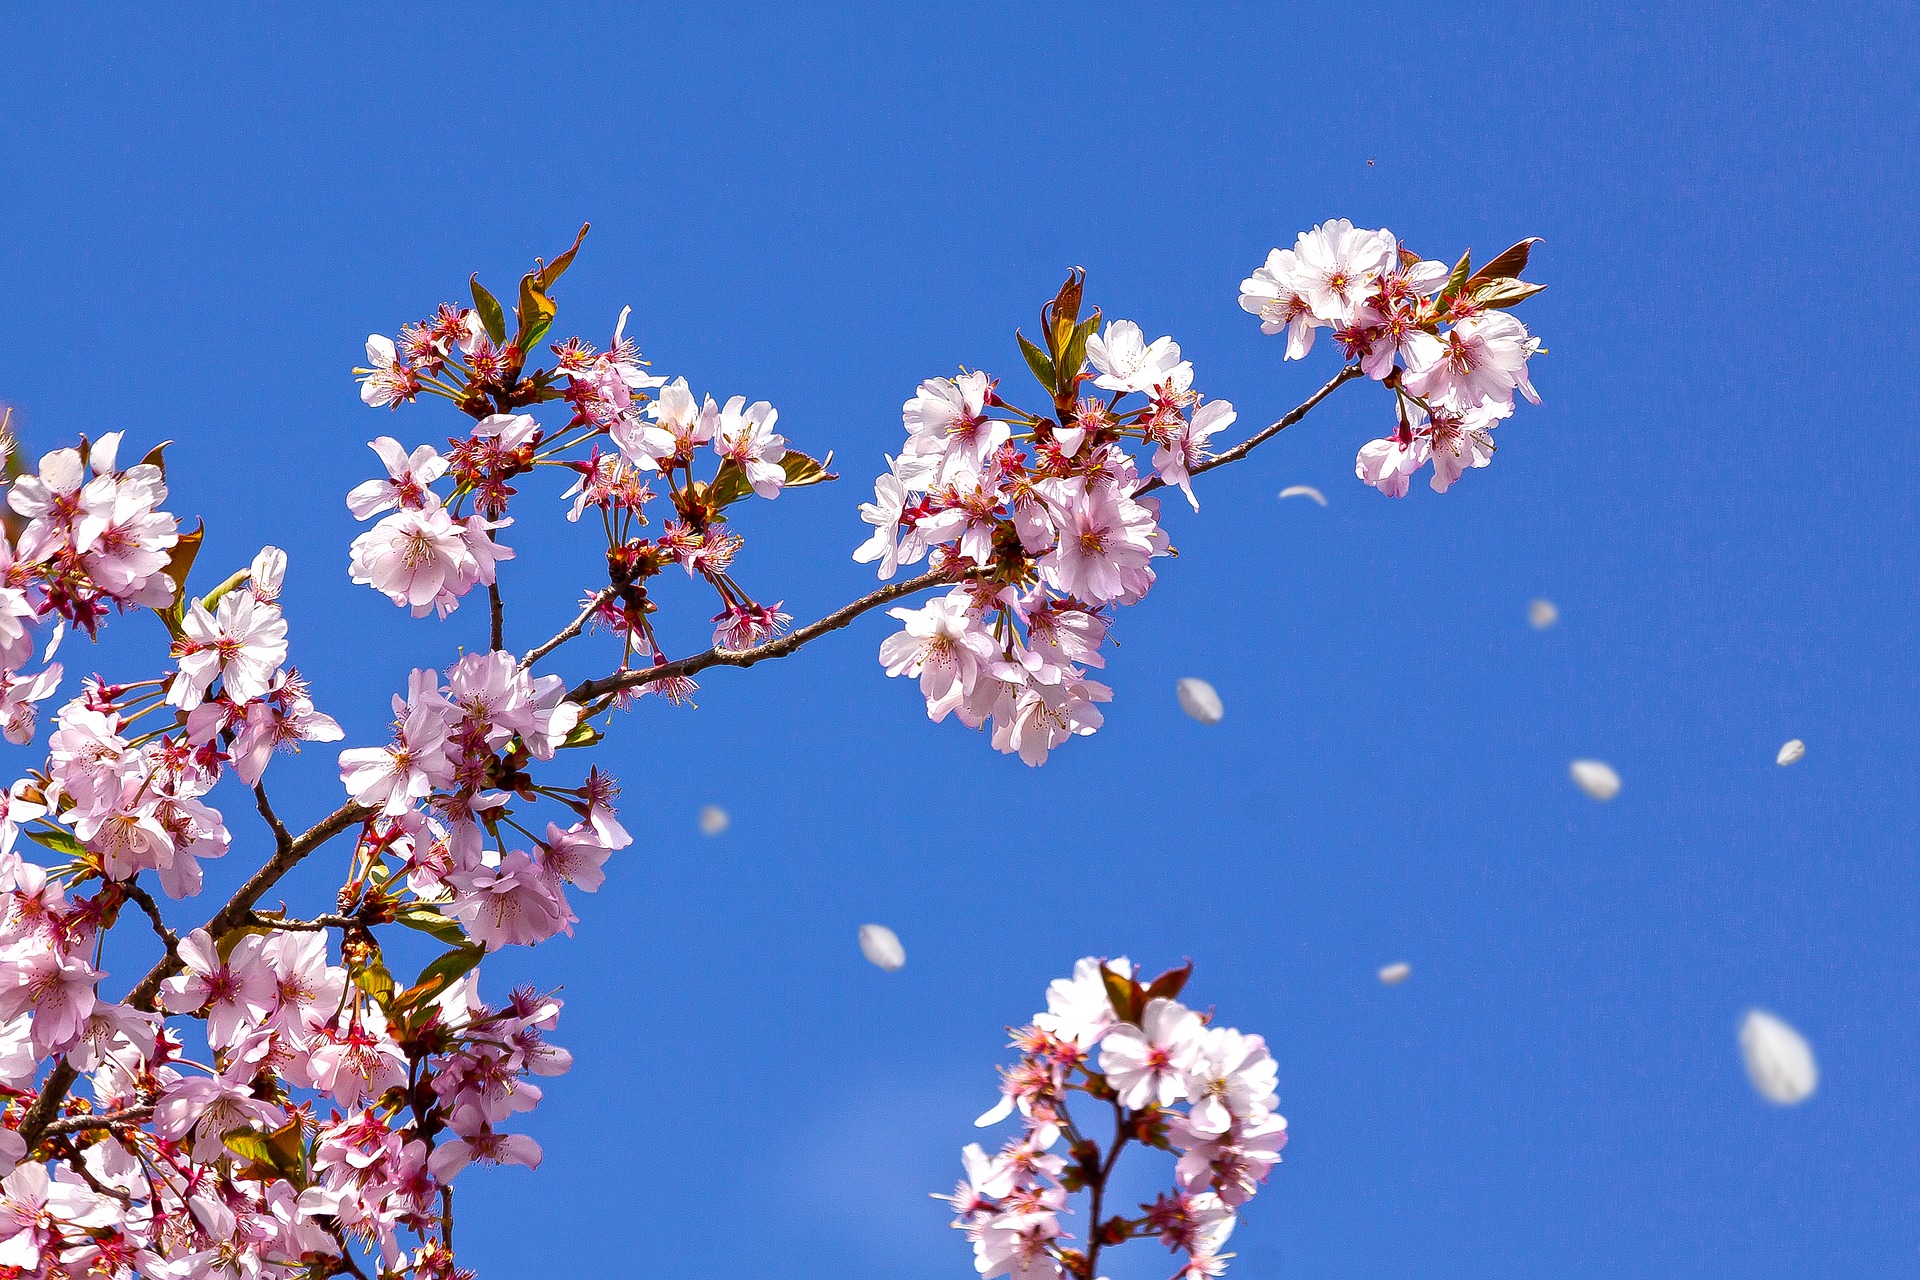 A tree branch with pink flowers in the sky.